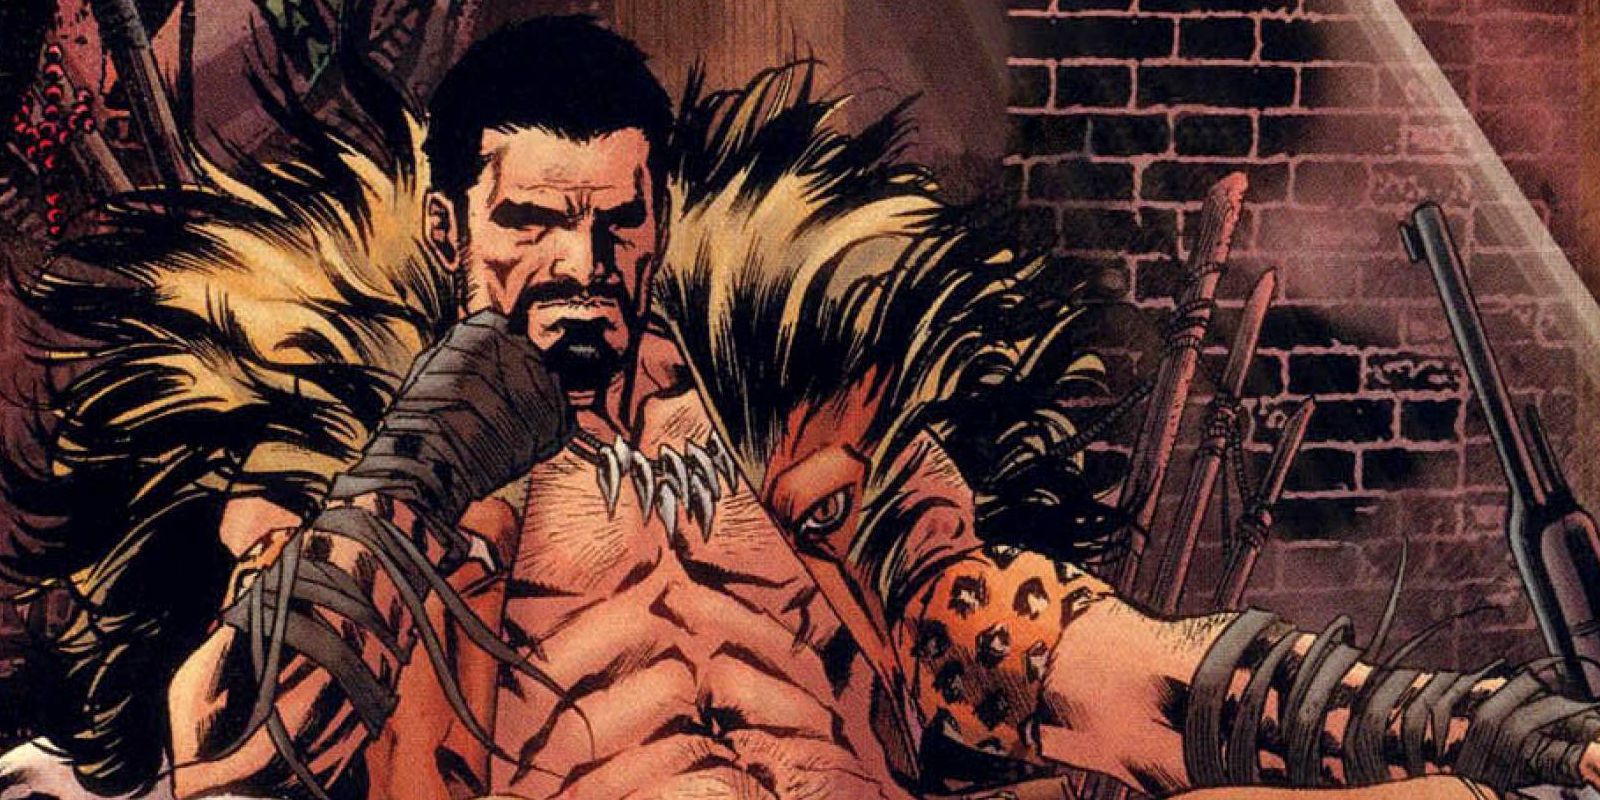 Kraven the Hunter in the Spider-Man comics.